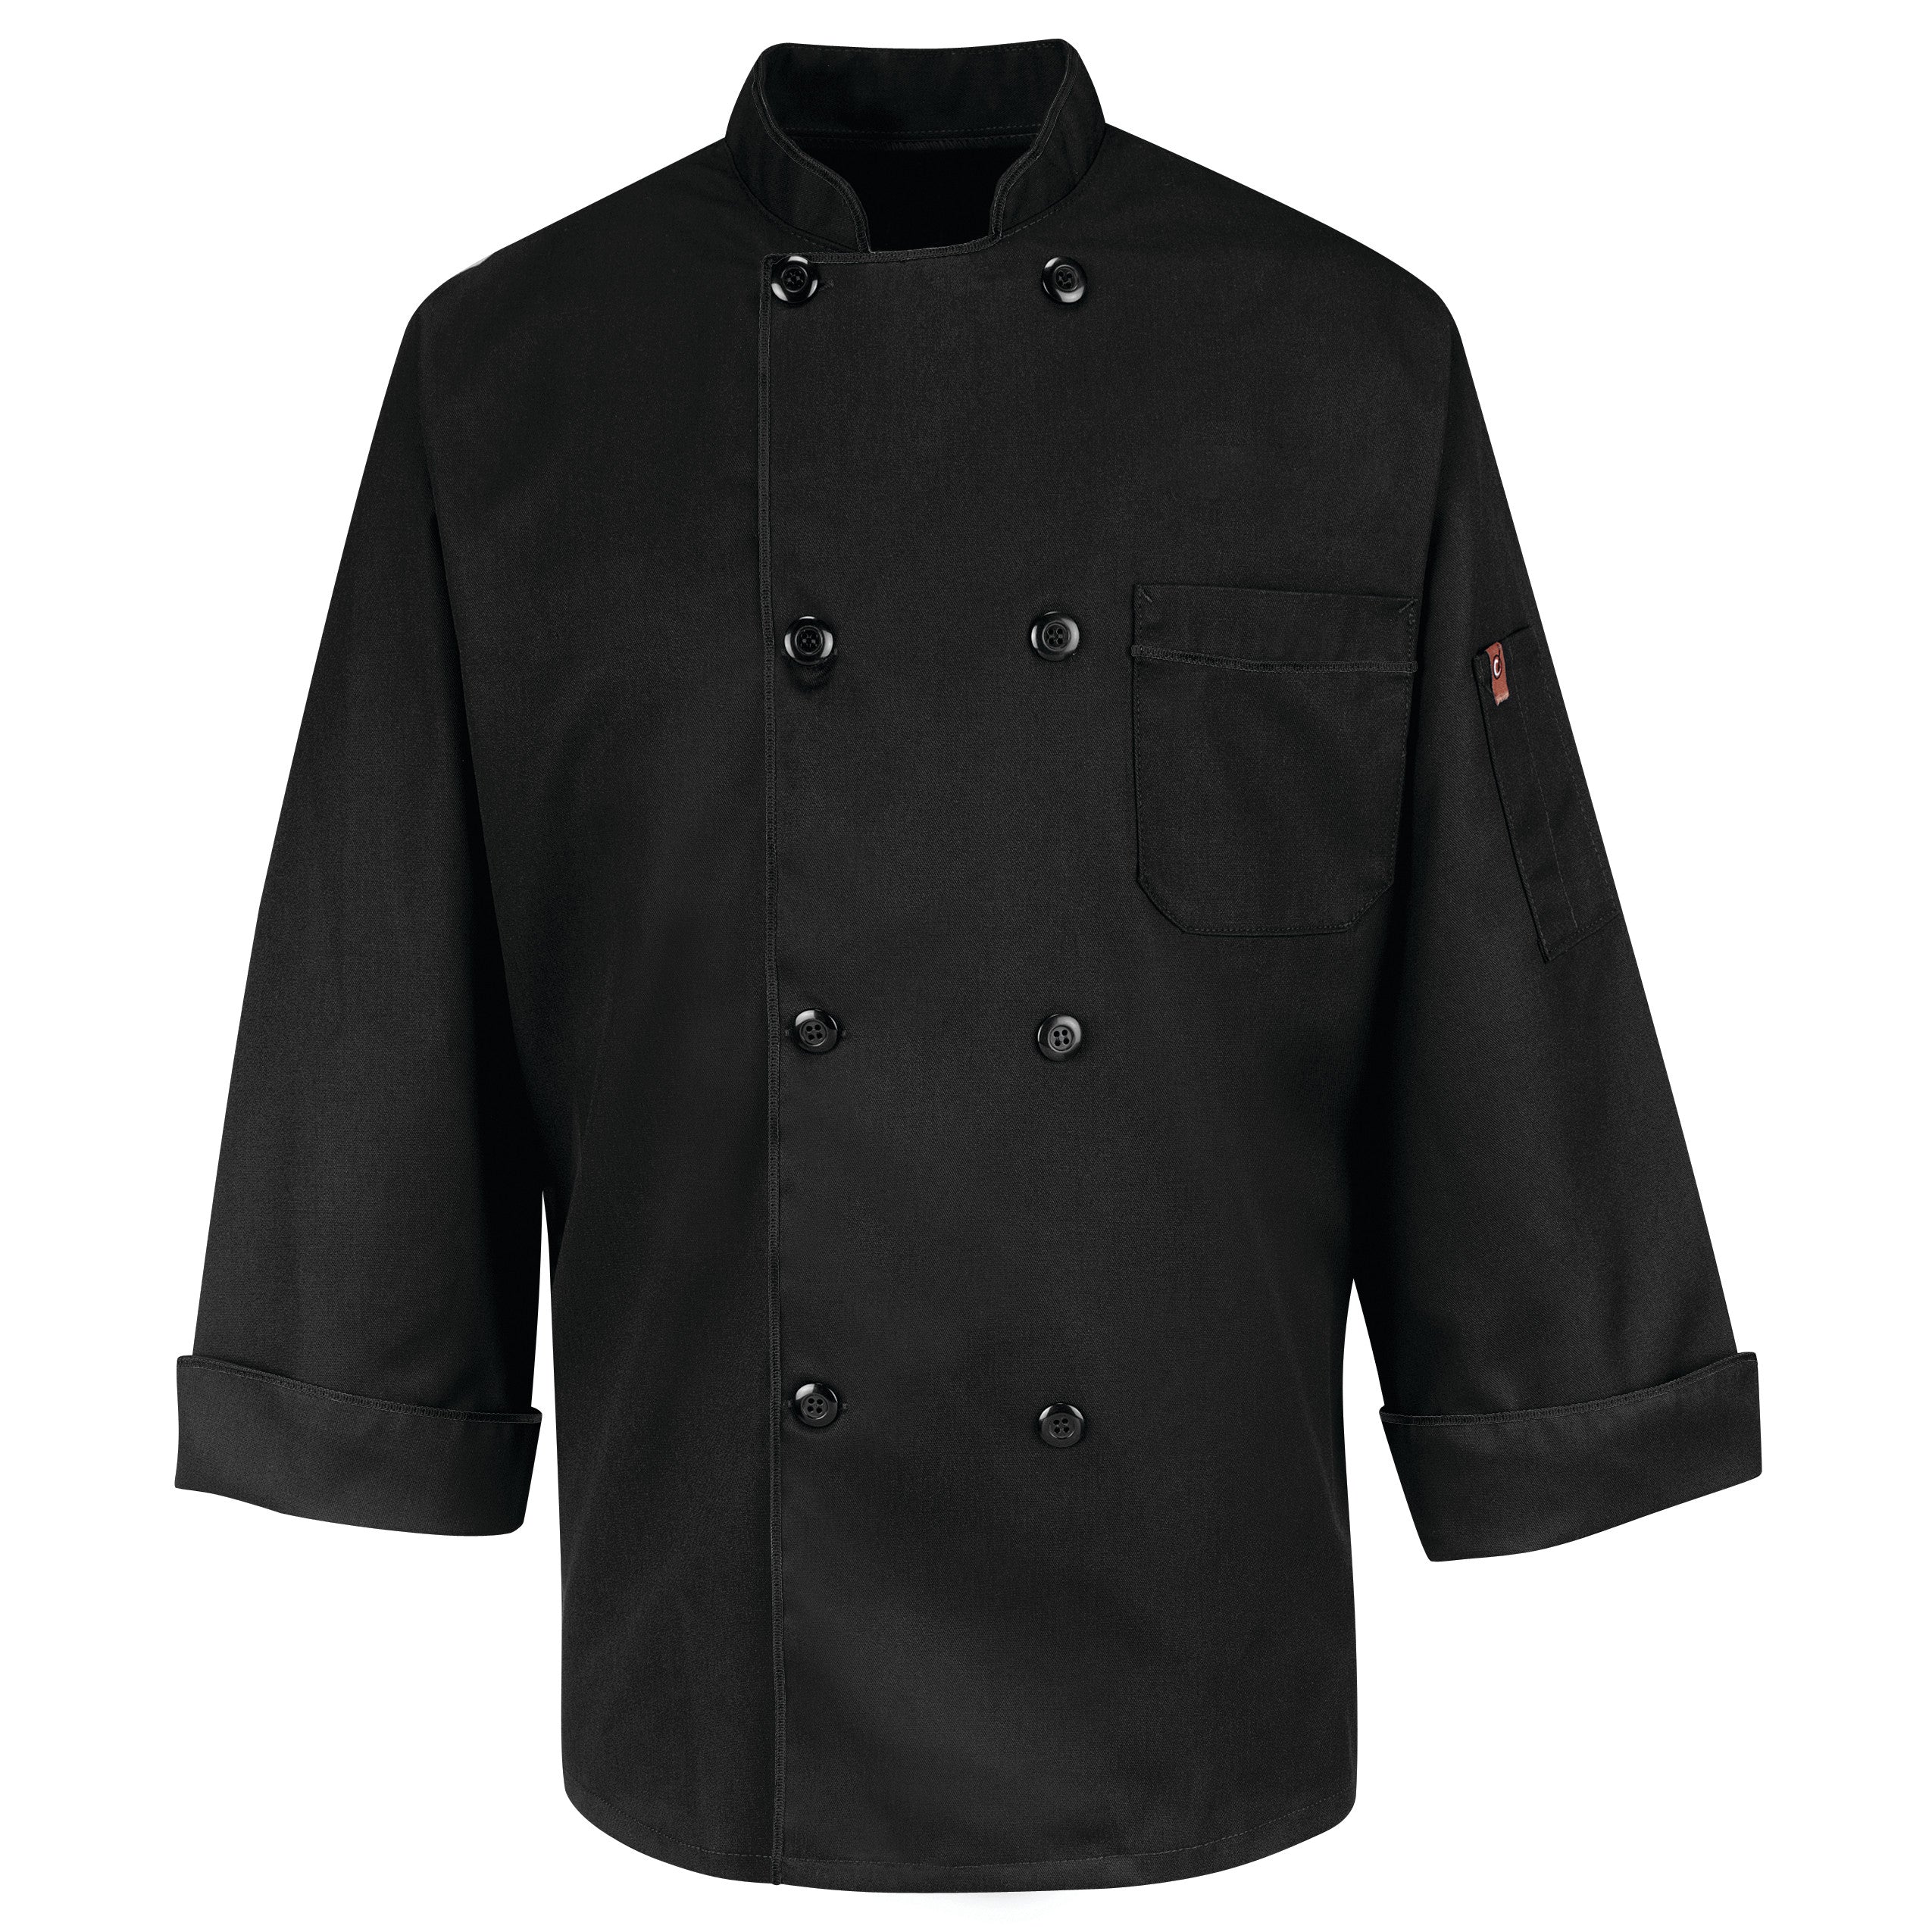 Eight Pearl Button Black Chef Coat KT76 - Black-eSafety Supplies, Inc